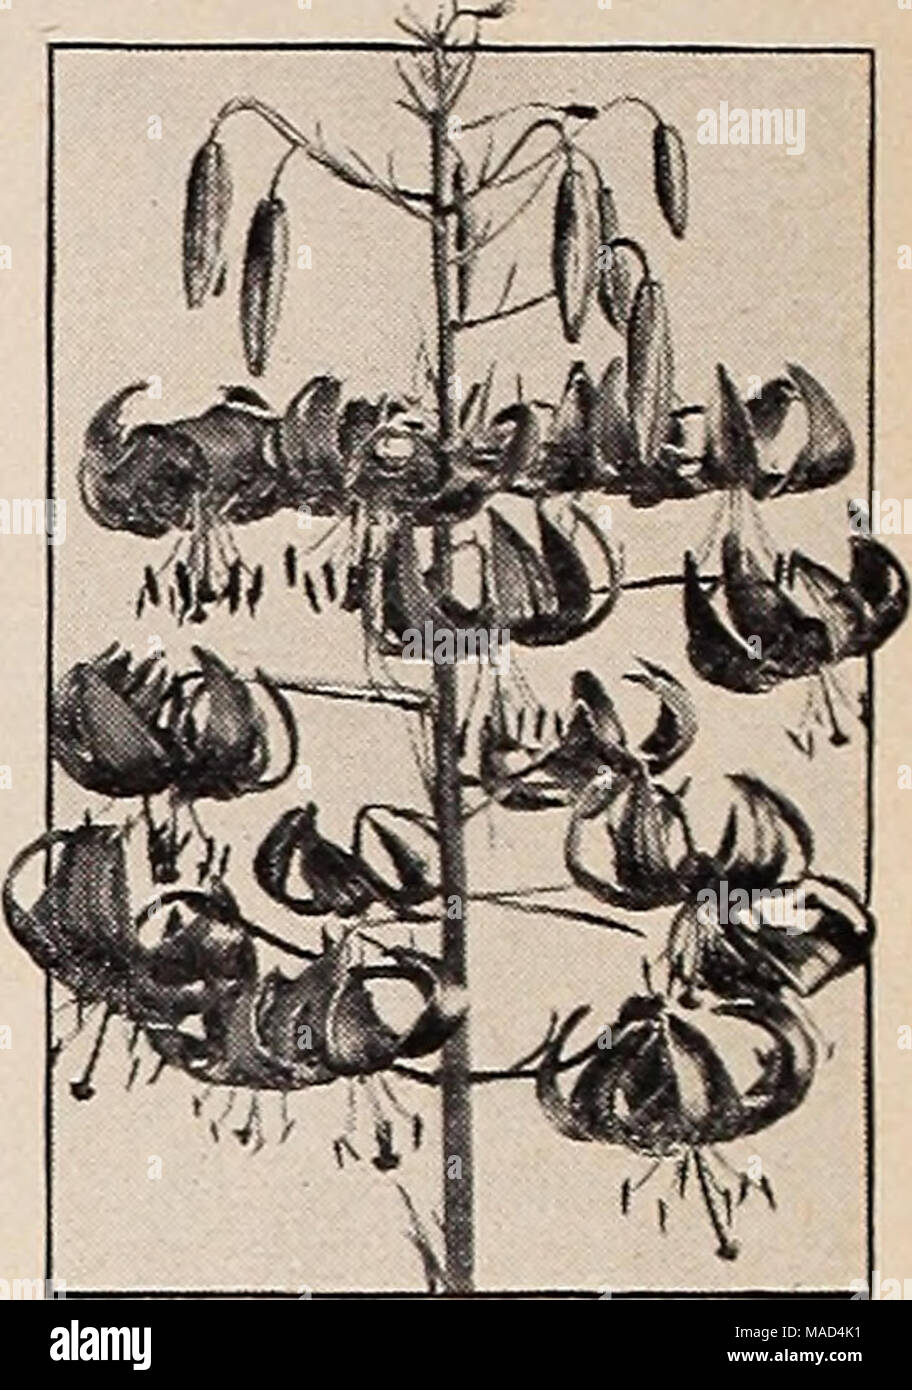 . Dreer's wholesale catalog for florists and market gardeners : autumn 1940 edition . Helenium Double Hollyhock Lilium tenuifolium Helenium—Helen's Flower Strong-g^rowing hardy perennials giving an enormous crop of flowers in late summer. Tr. pkt. Vi Oz. Autumnale Superbum. Golden yellow flowers; 5 to 6 ft $0 50 $1 00 Blverton Oem. Old gold changing to Wallflower red 50 1 00 Helianthemum—Rock or Sun Rose Uutabile, exceedingly pretty, low-growing evergreen plants forming broad clumps, and which during their flowering season, .July to September, are quite hidden by a mass of bloom. Well adapted  Stock Photo